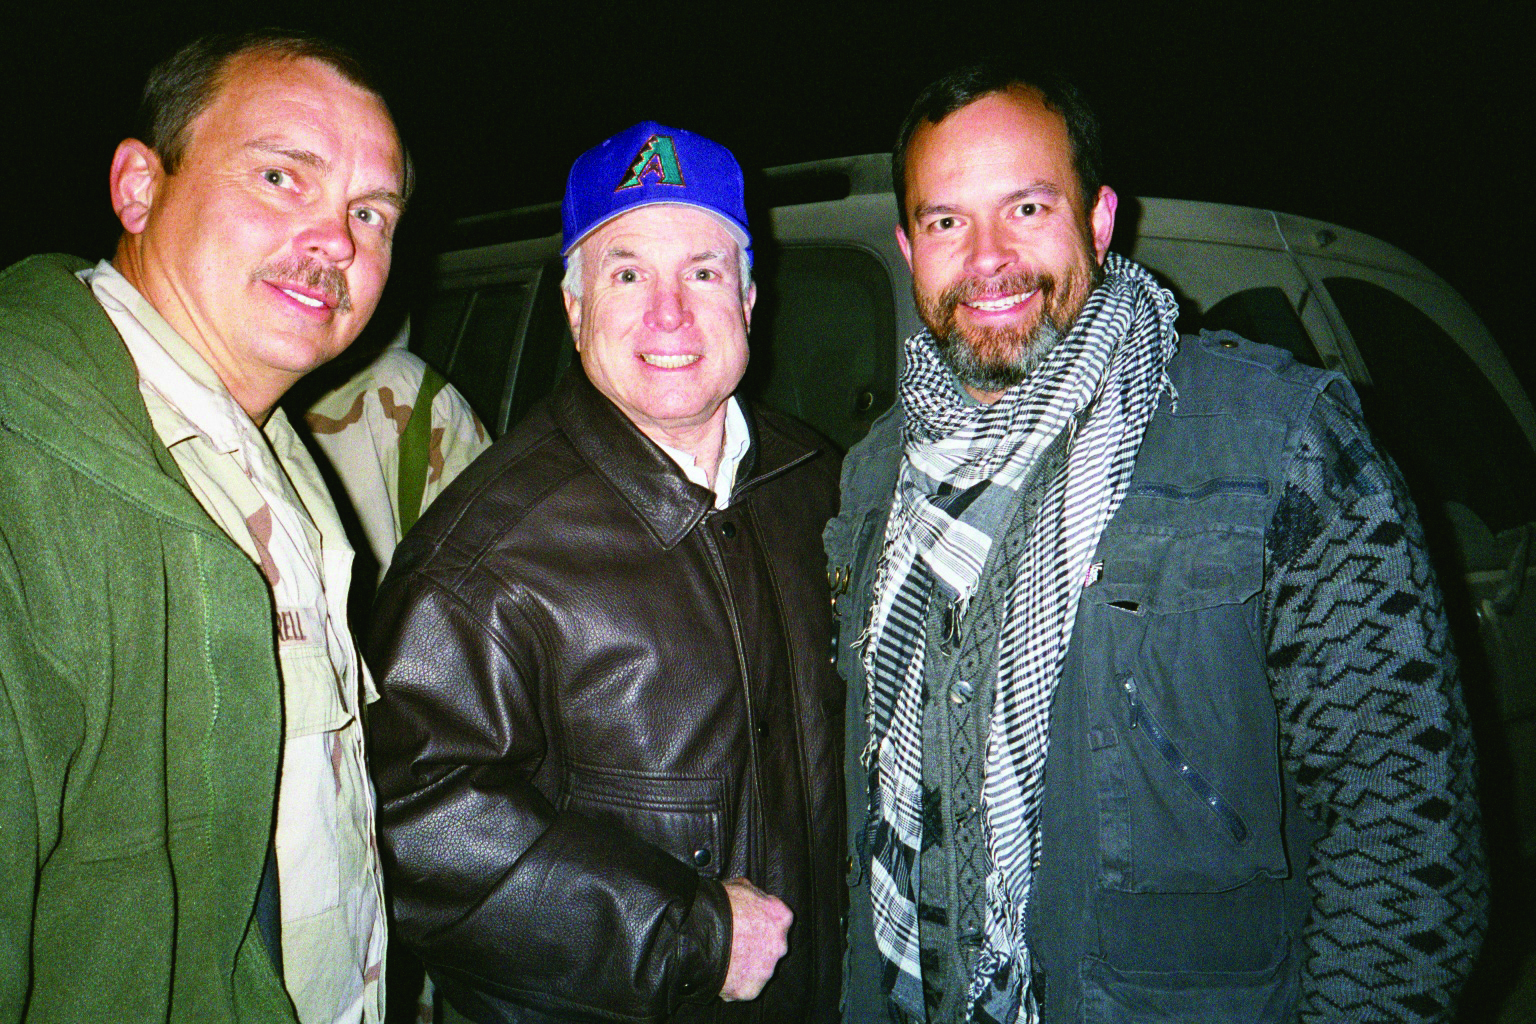 Lieutenant Colonel C. John Taylor (right) was the
        first member of the Corps to set foot on Afghan
        soil. In this photograph, taken in Afghanistan on 7
        January 2002, Taylor is joined by Brigadier General
        Gary Harrell (left) and Senator John McCain (middle).
        (Photo courtesy of author)